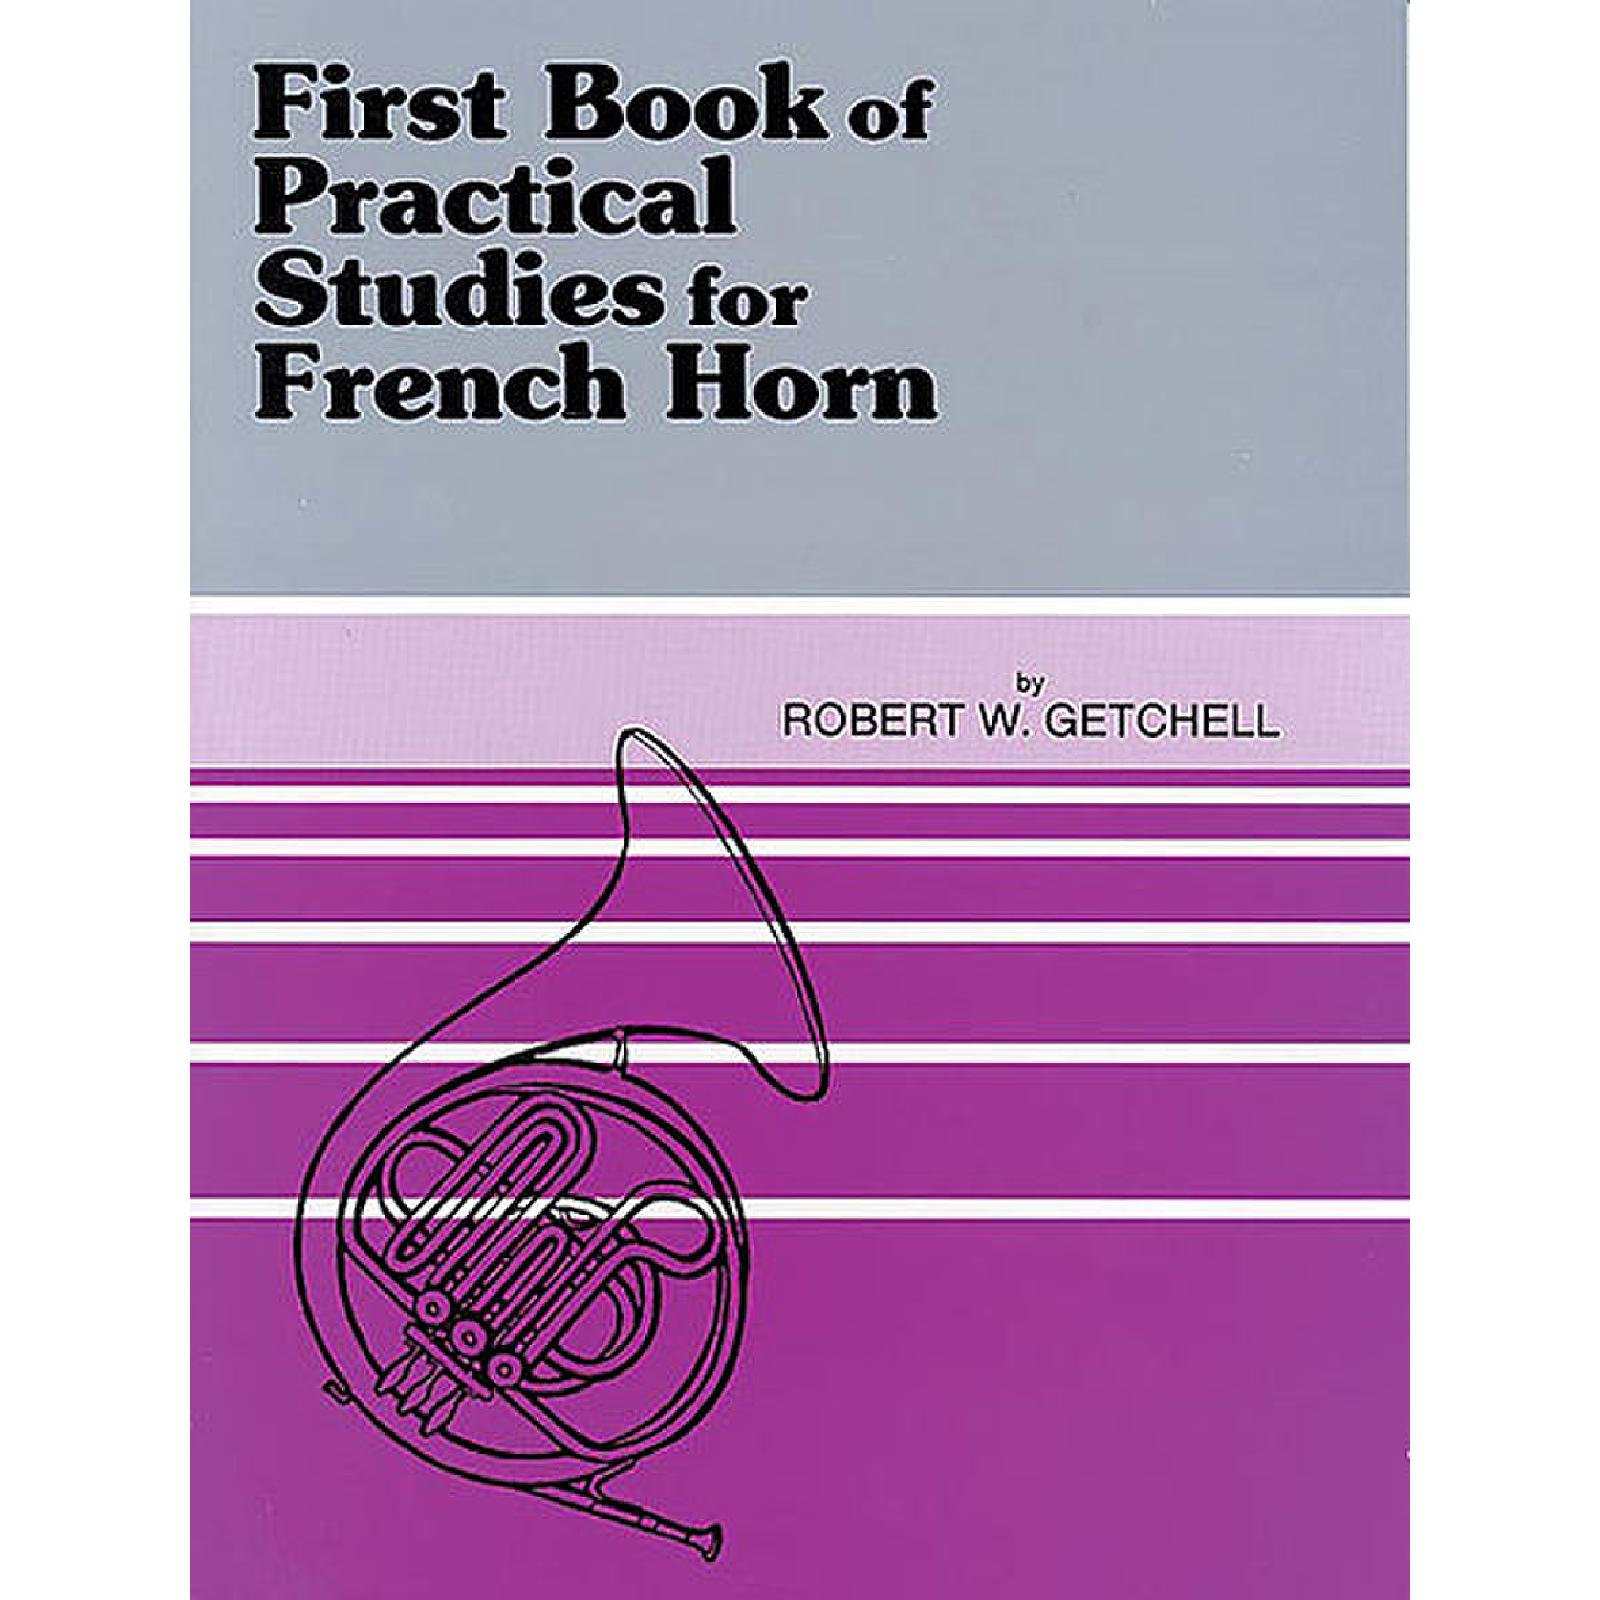 First Book of Practical Studies - Getchell, Horn